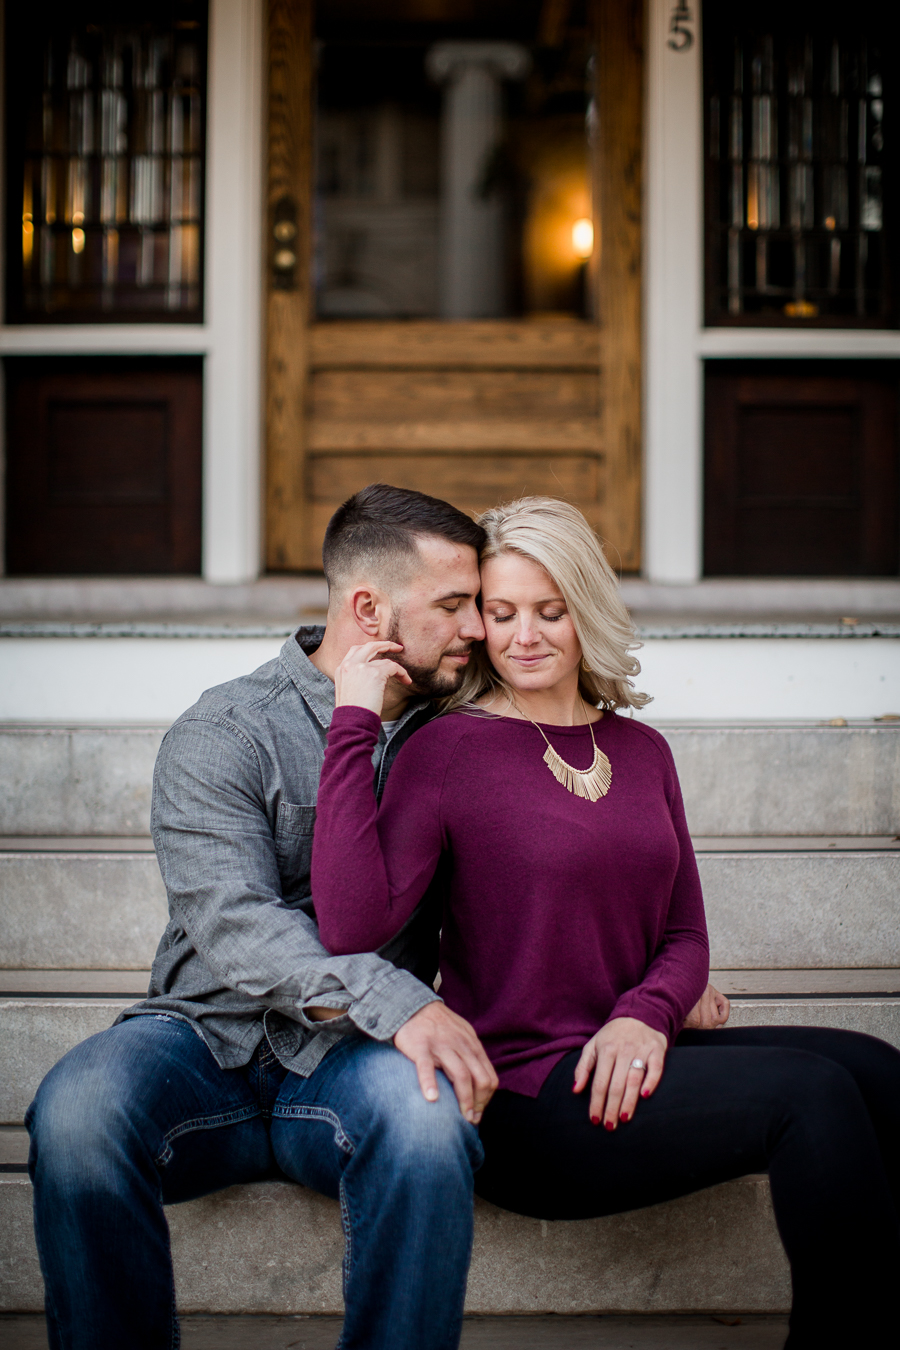 Her hand reached back on his cheek engagement photo by Knoxville Wedding Photographer, Amanda May Photos.